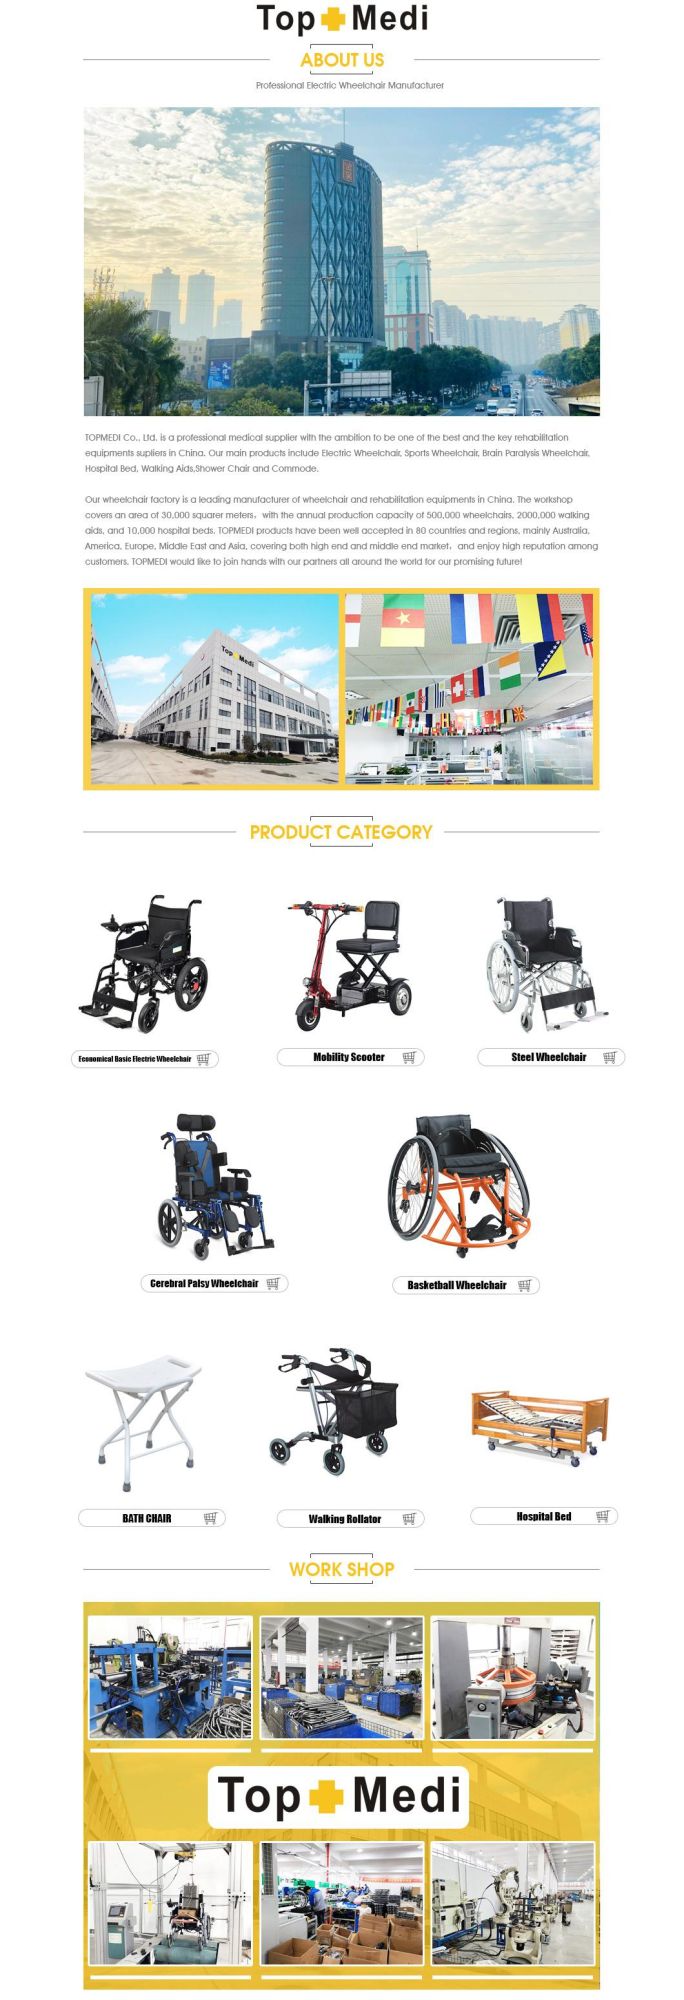 Elevating Footrest Wheelchair Lightweight Power Wheel Chair for Disabled Elderly People